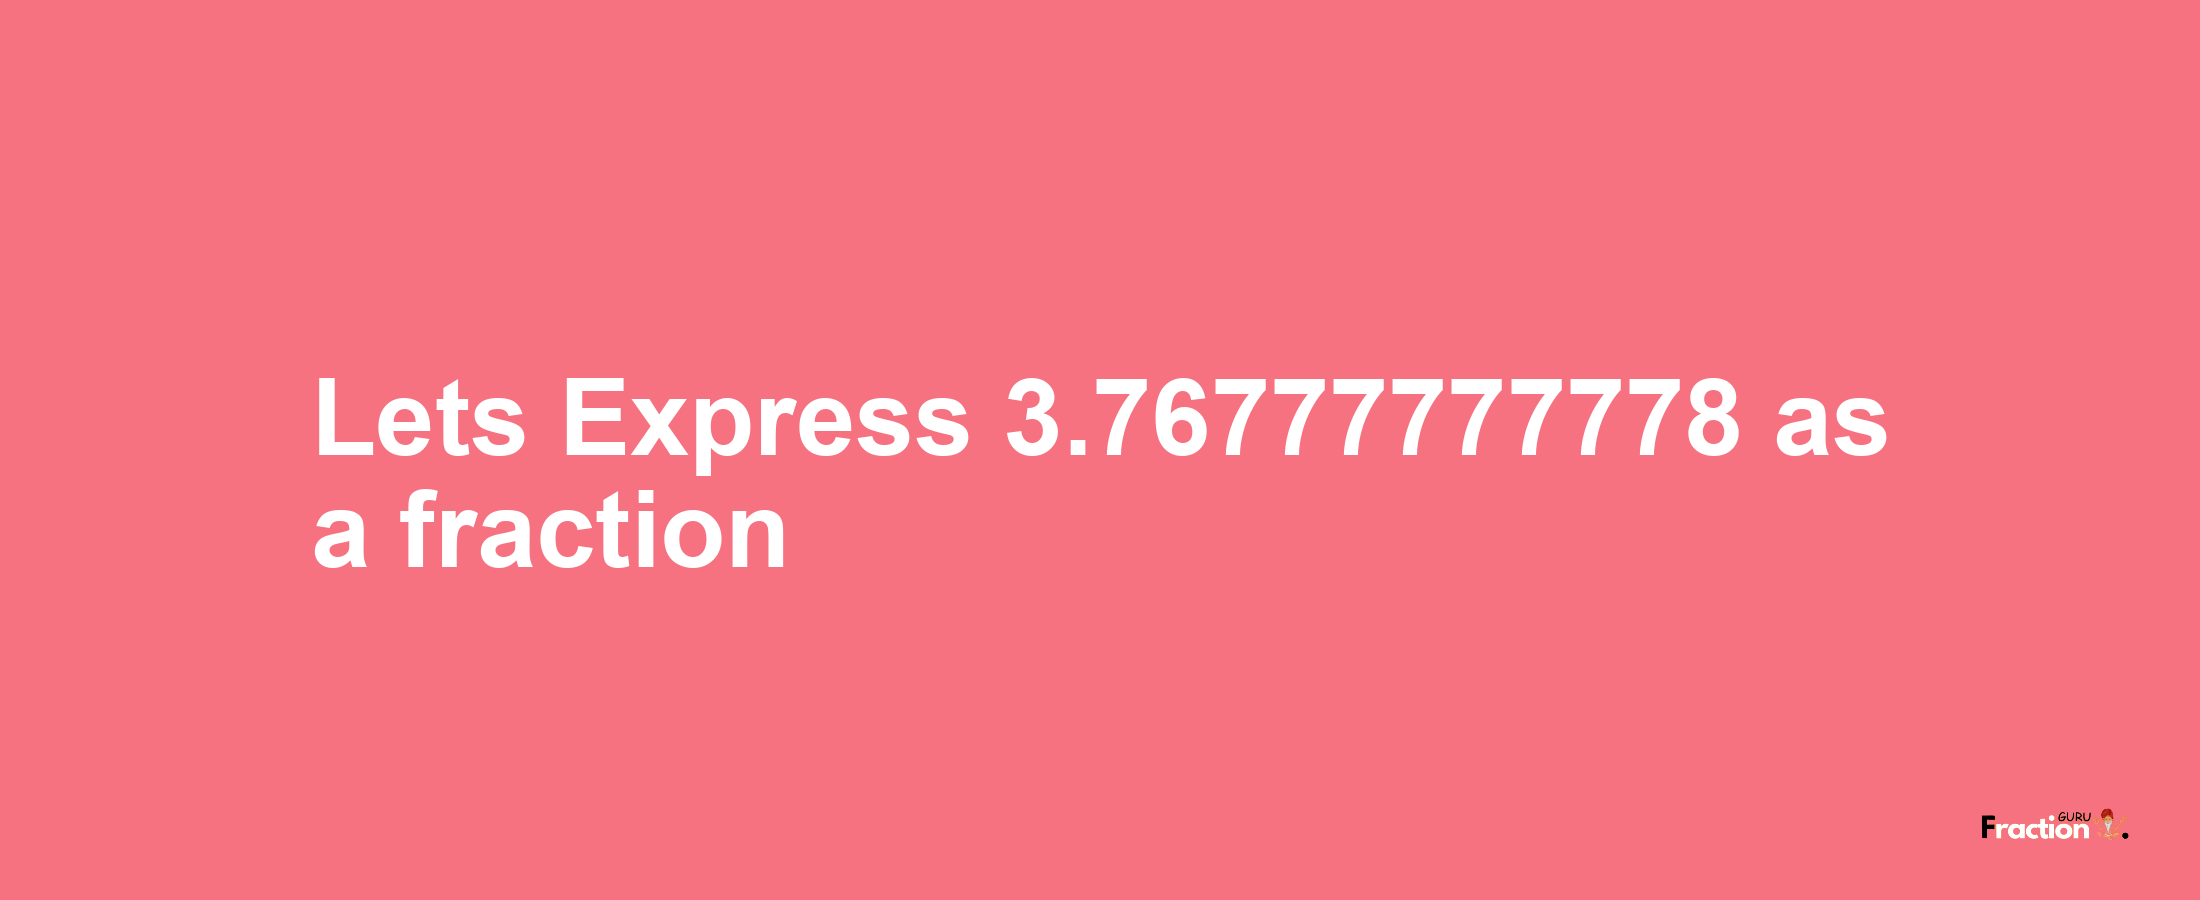 Lets Express 3.76777777778 as afraction